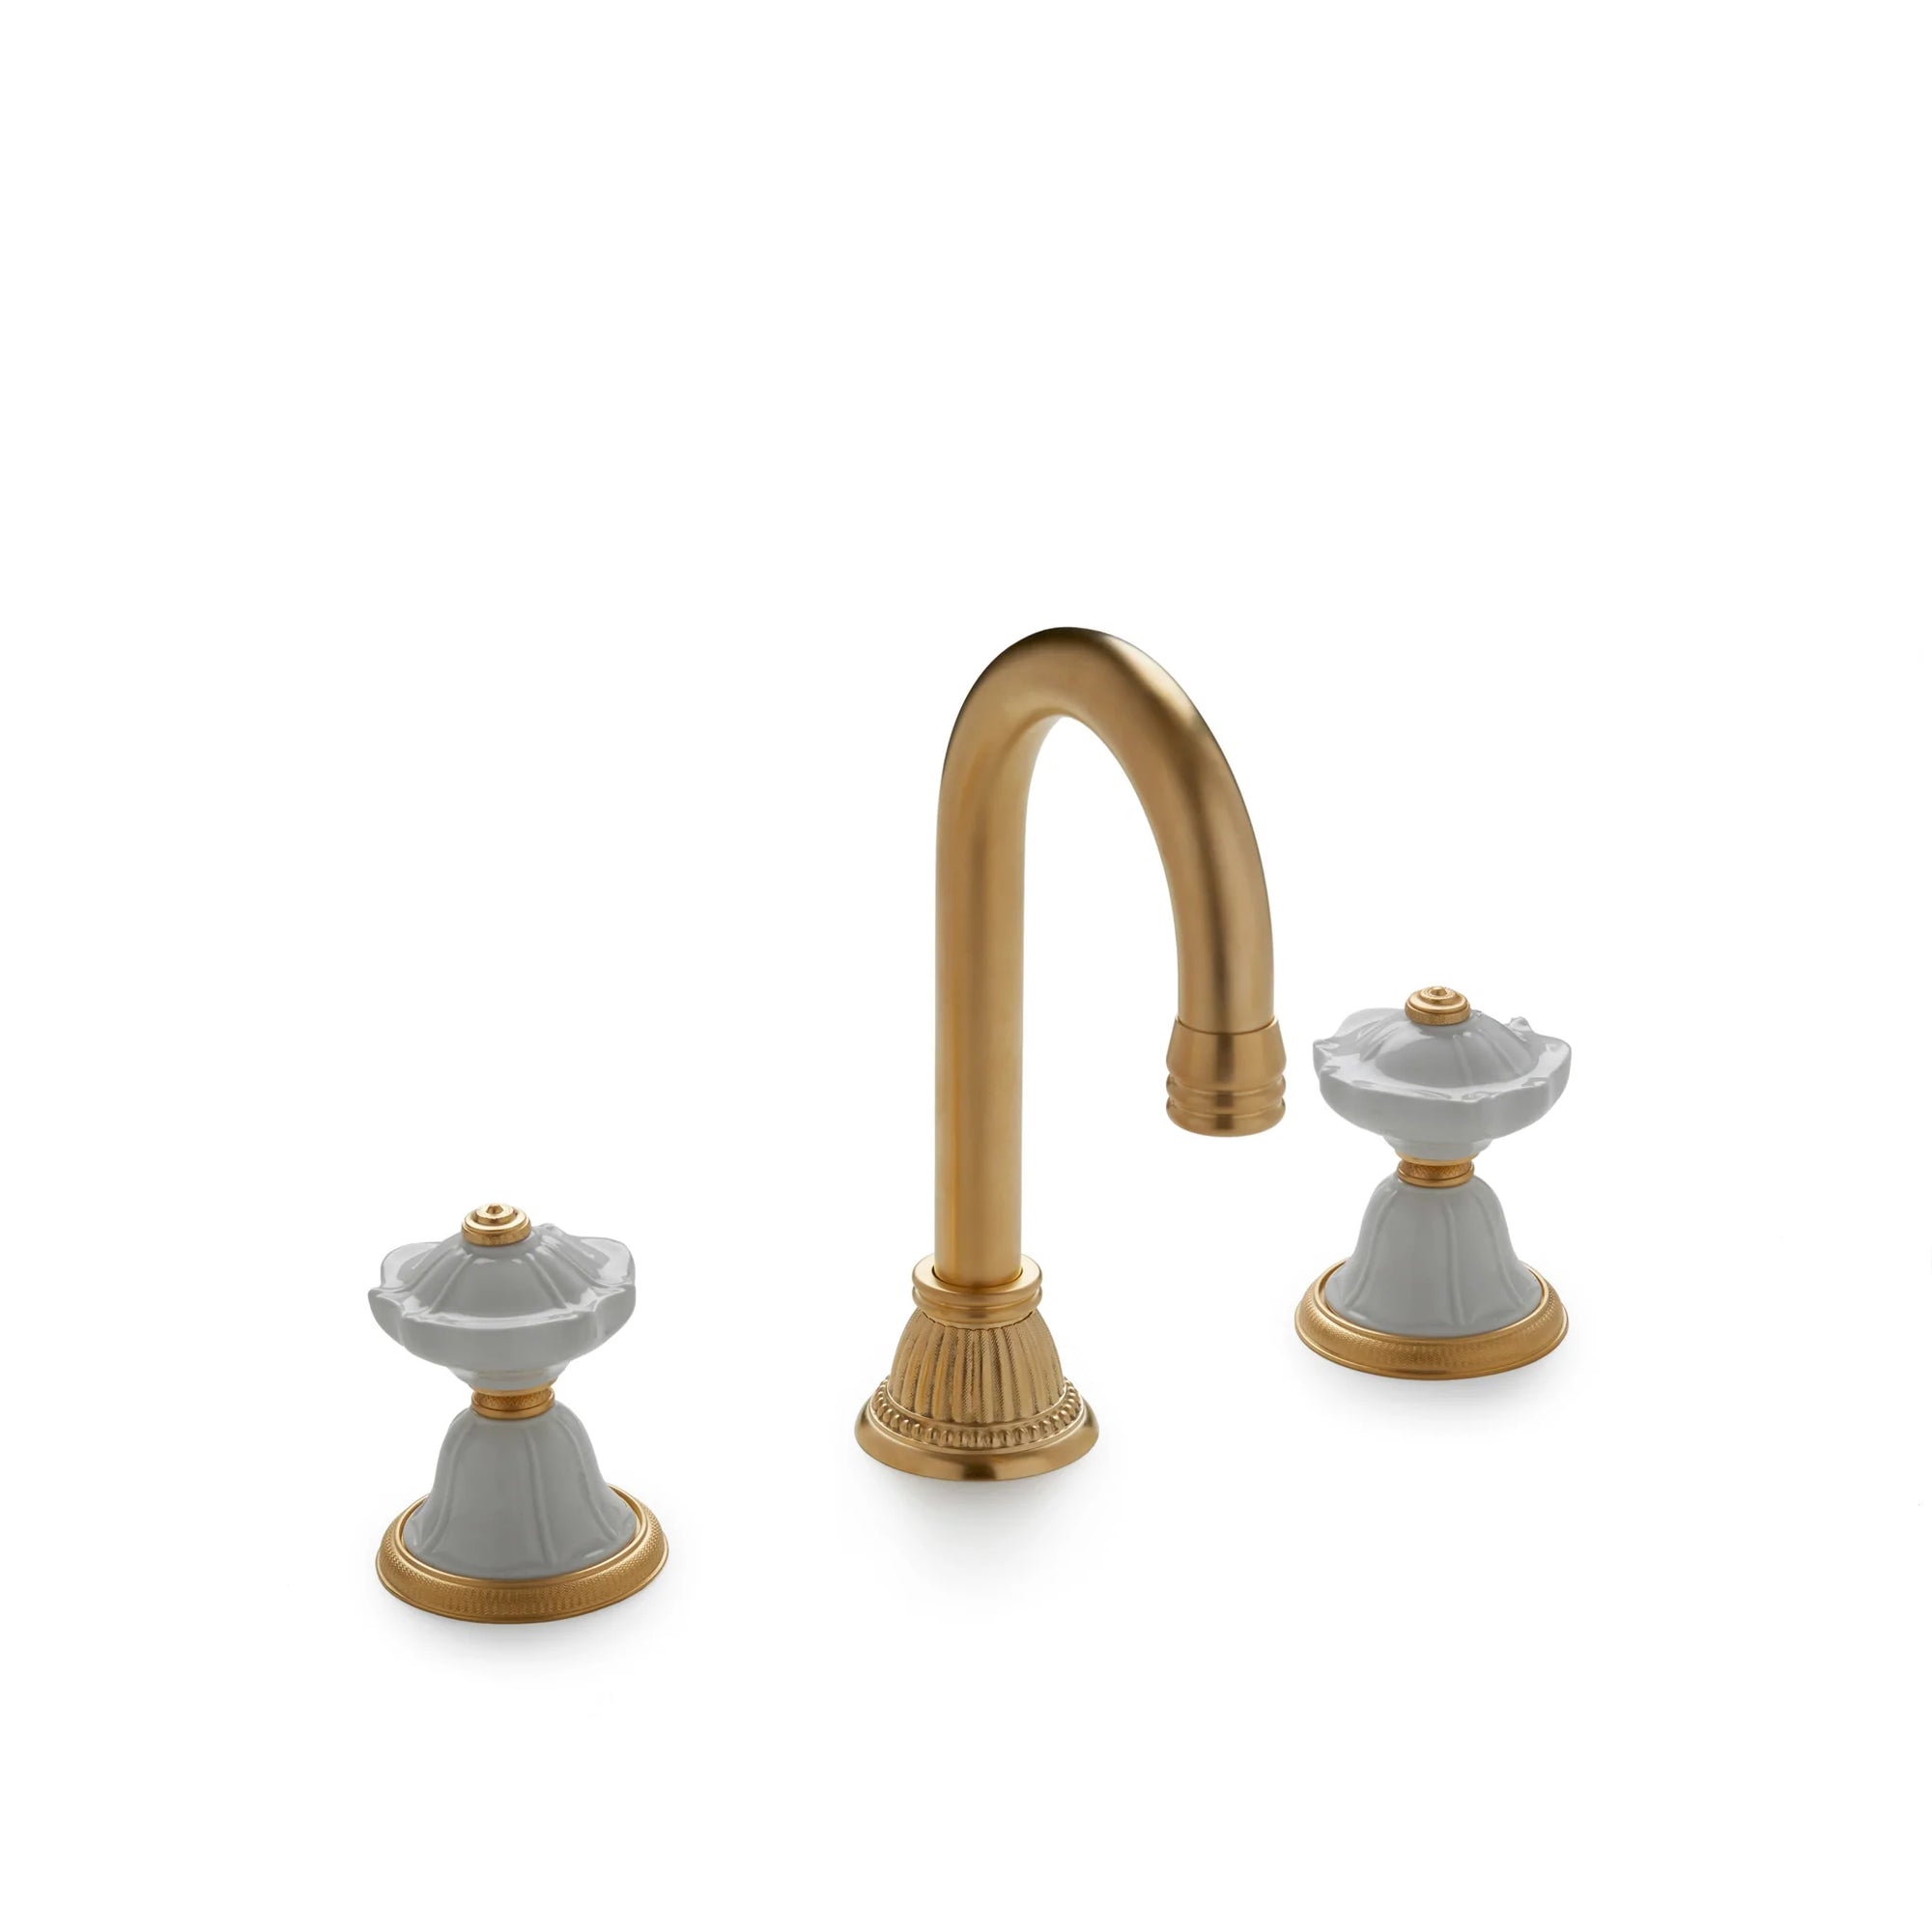 1097BAR800CL-03WH-GP Sherle Wagner International Scalloped Ceramic Knob Bar Set in Gold Plate metal finish with White Glaze inserts